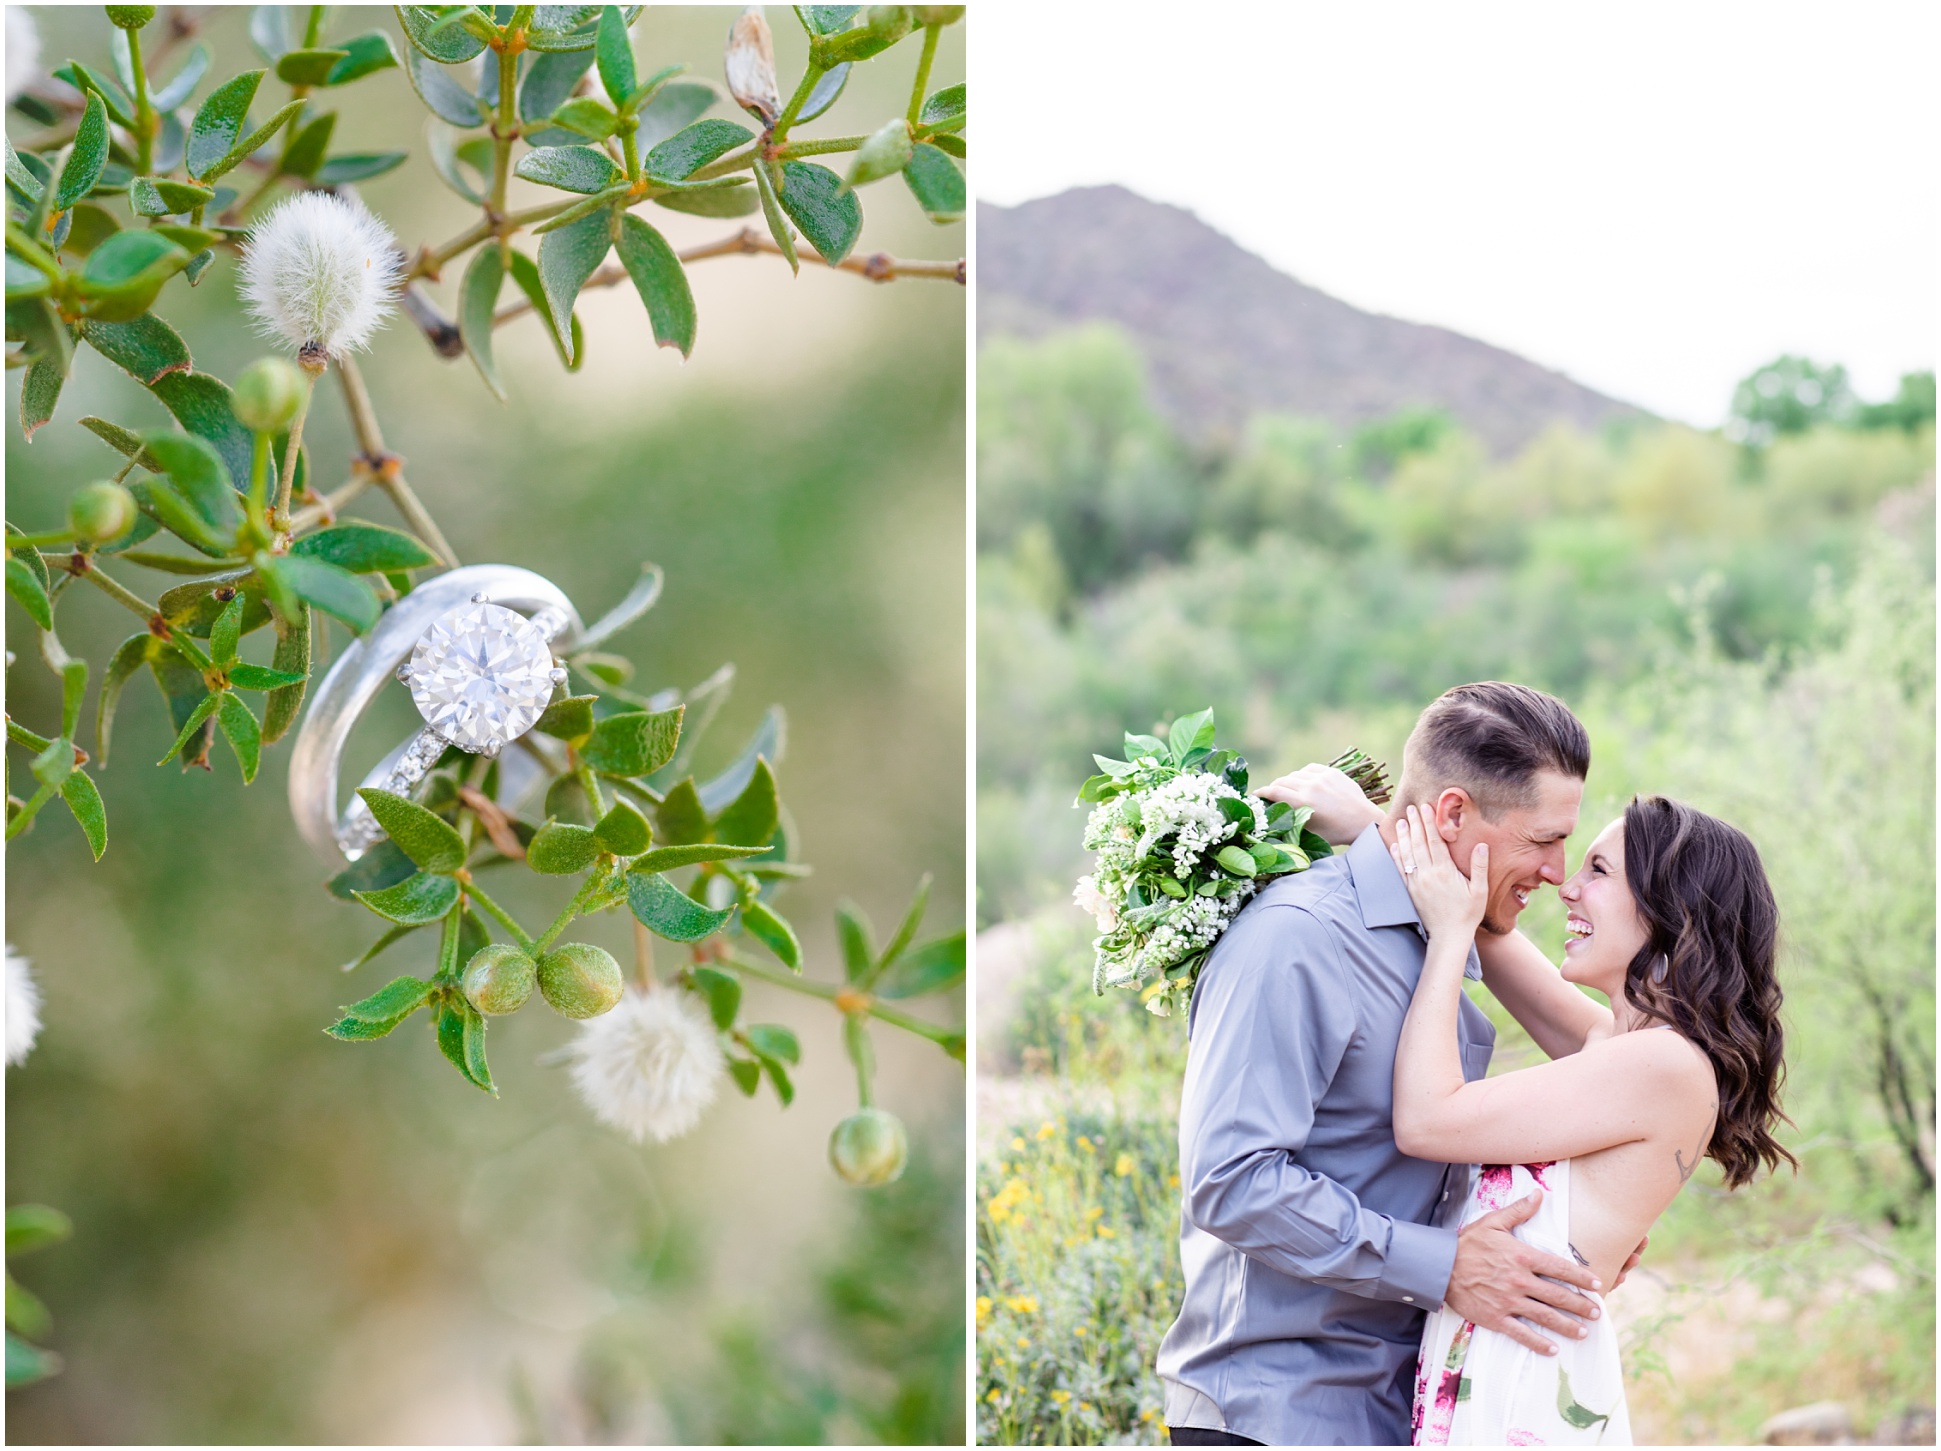 Left Image: rings hanging on an arizona desert bush, right image: Jessica and Michael giggling